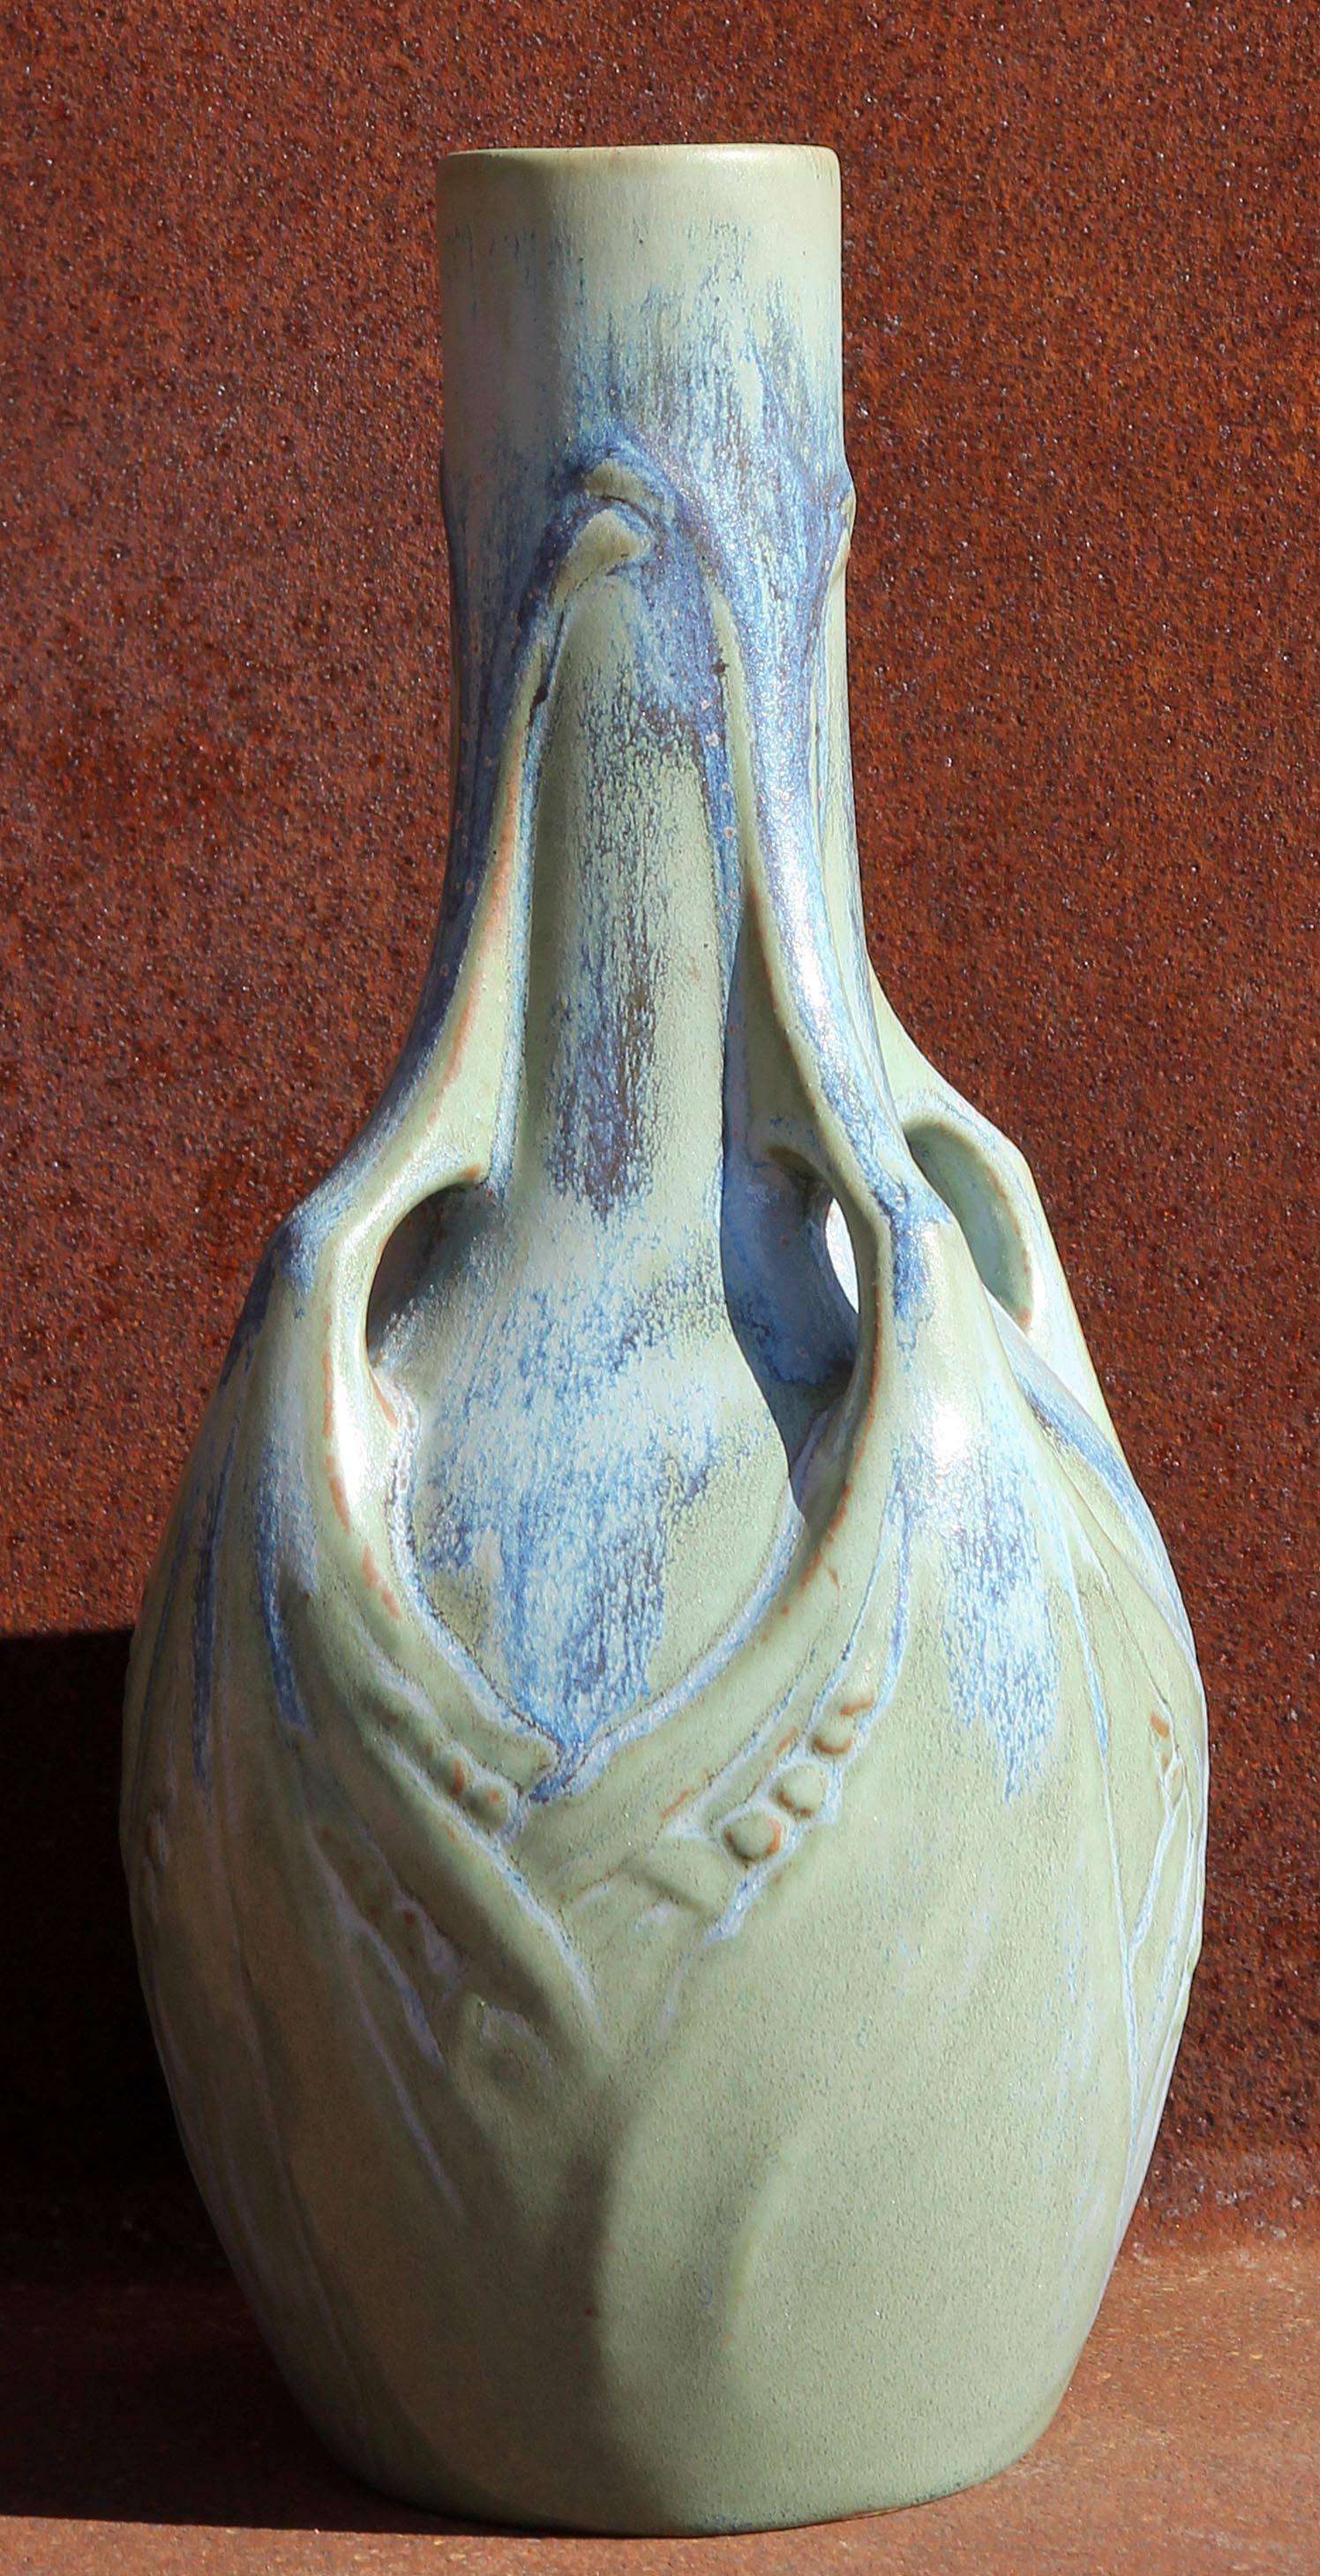 Art Nouveau pottery vase with blue and green drip glaze. By French maker Denbac.